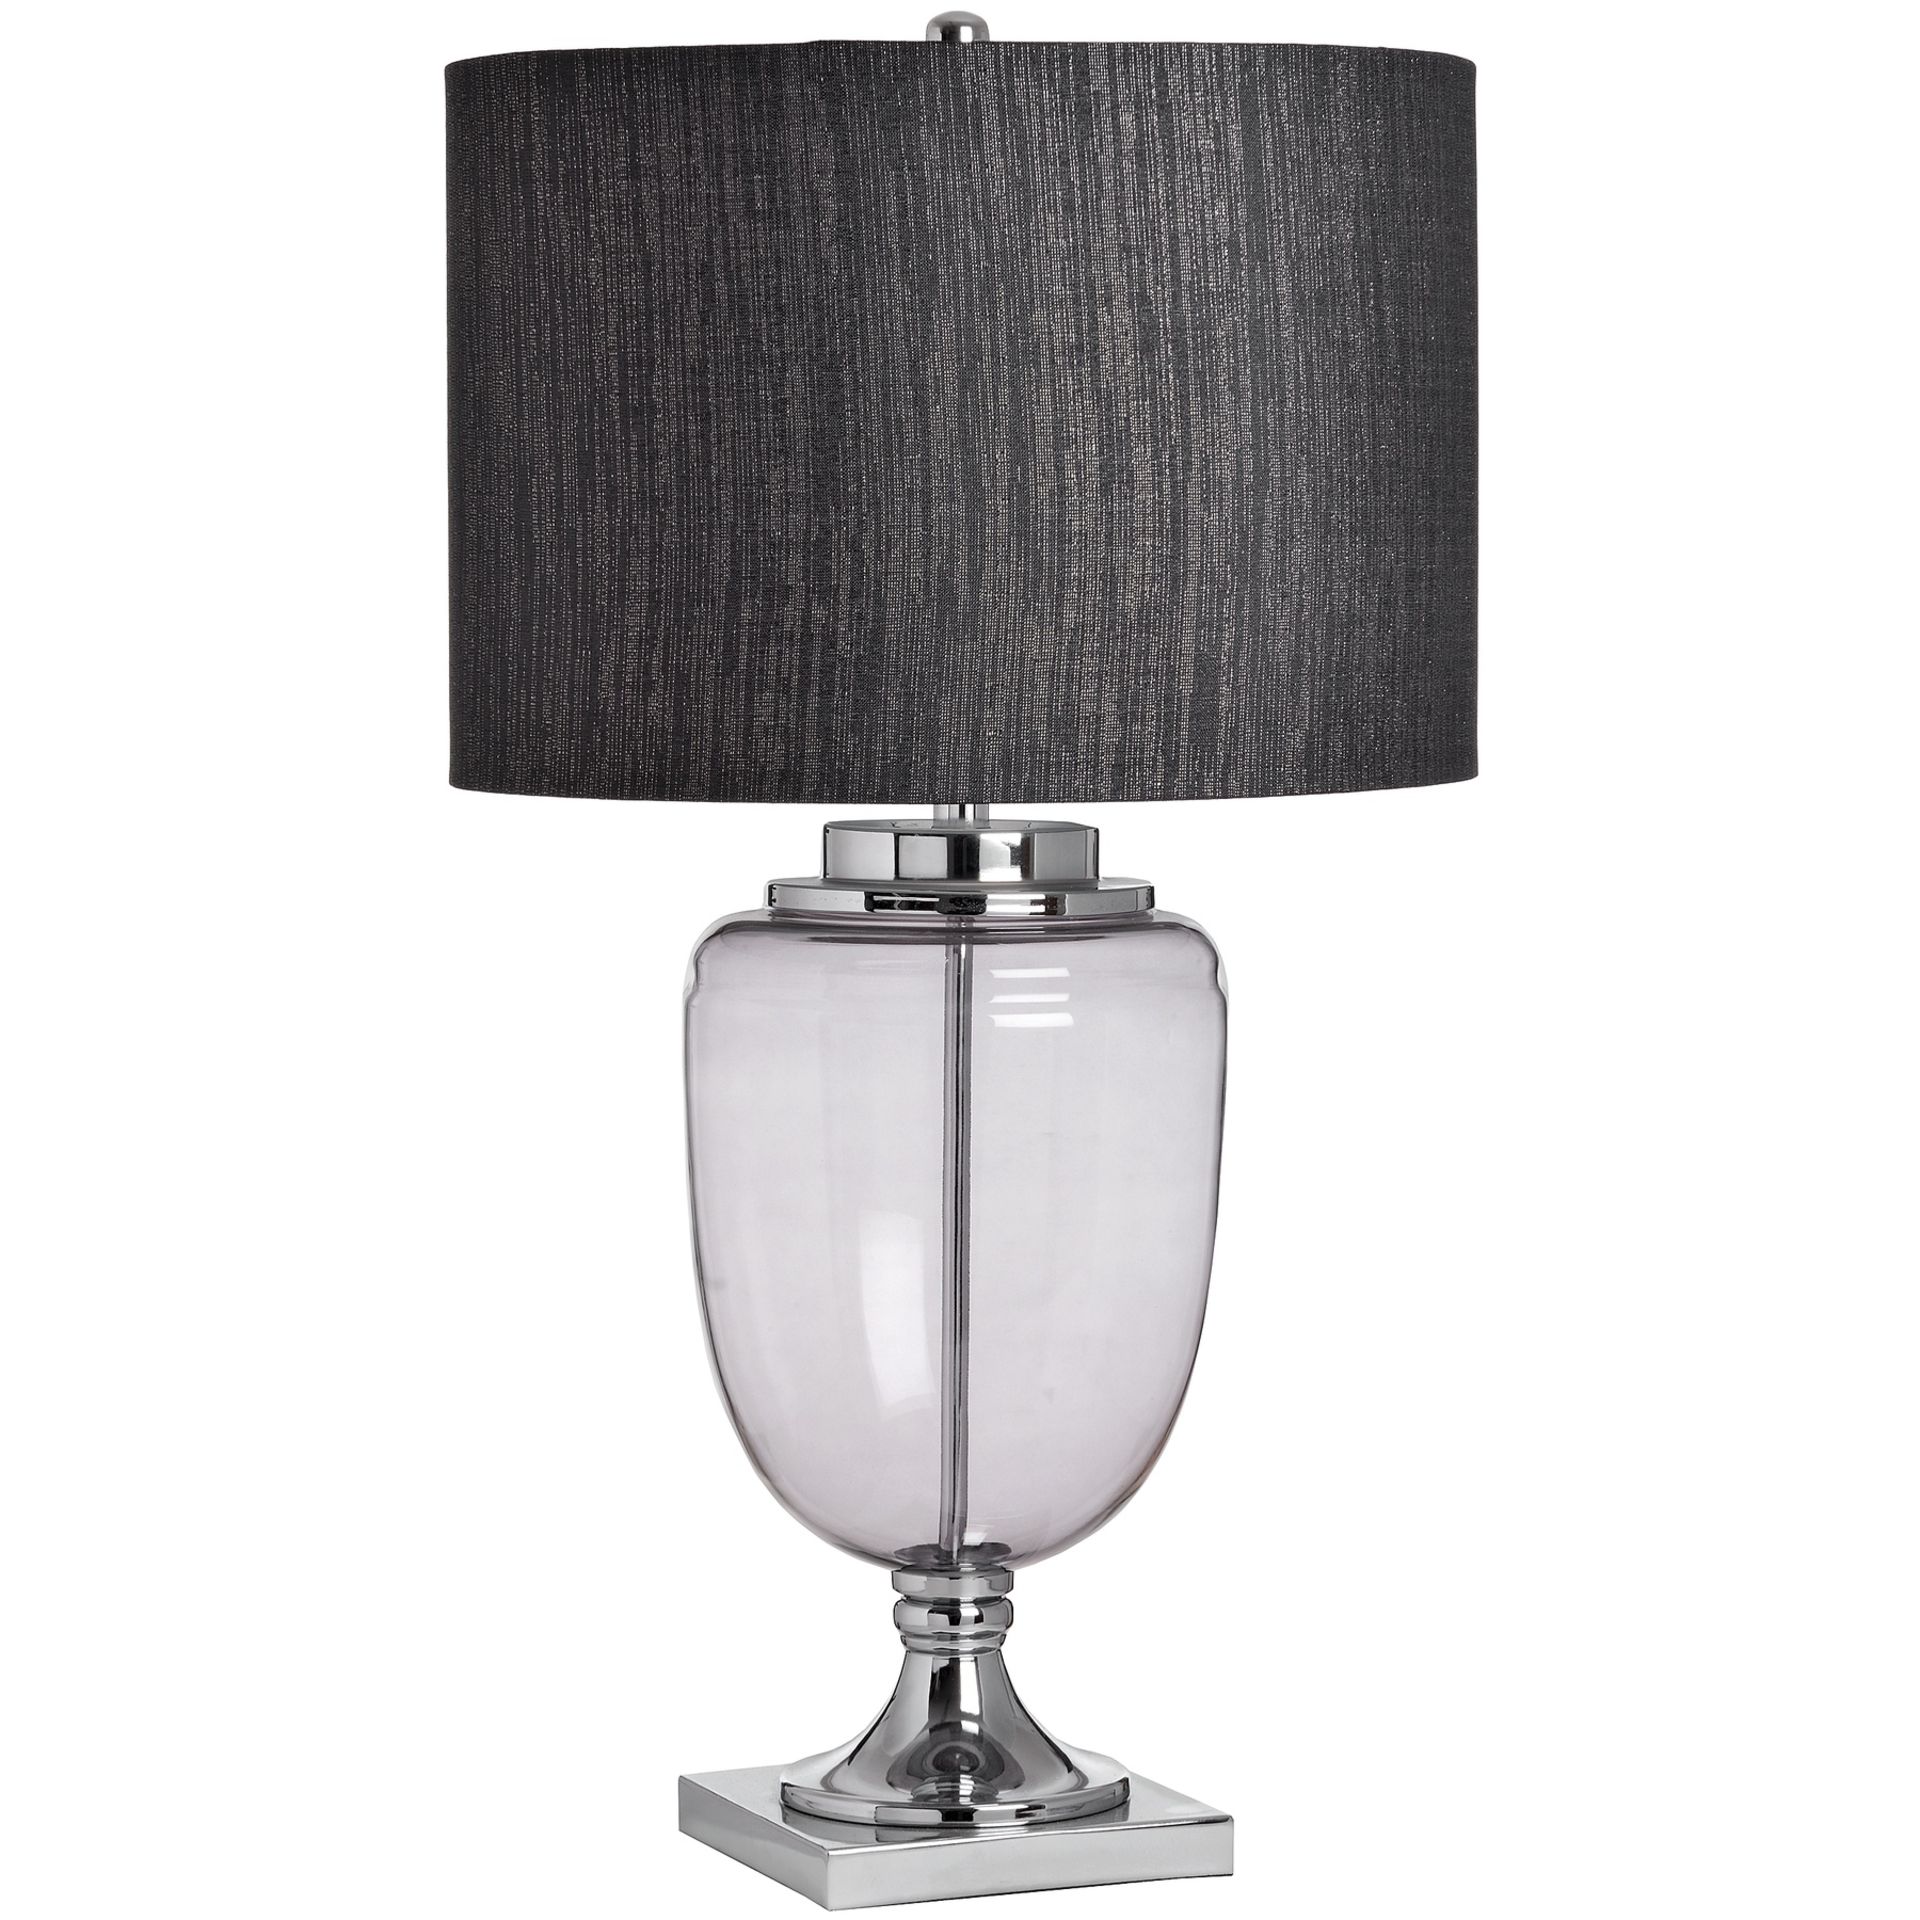 Chelsea Large Glass Table Lamp, a sleek and contemporary designed lamp that would be a welcome